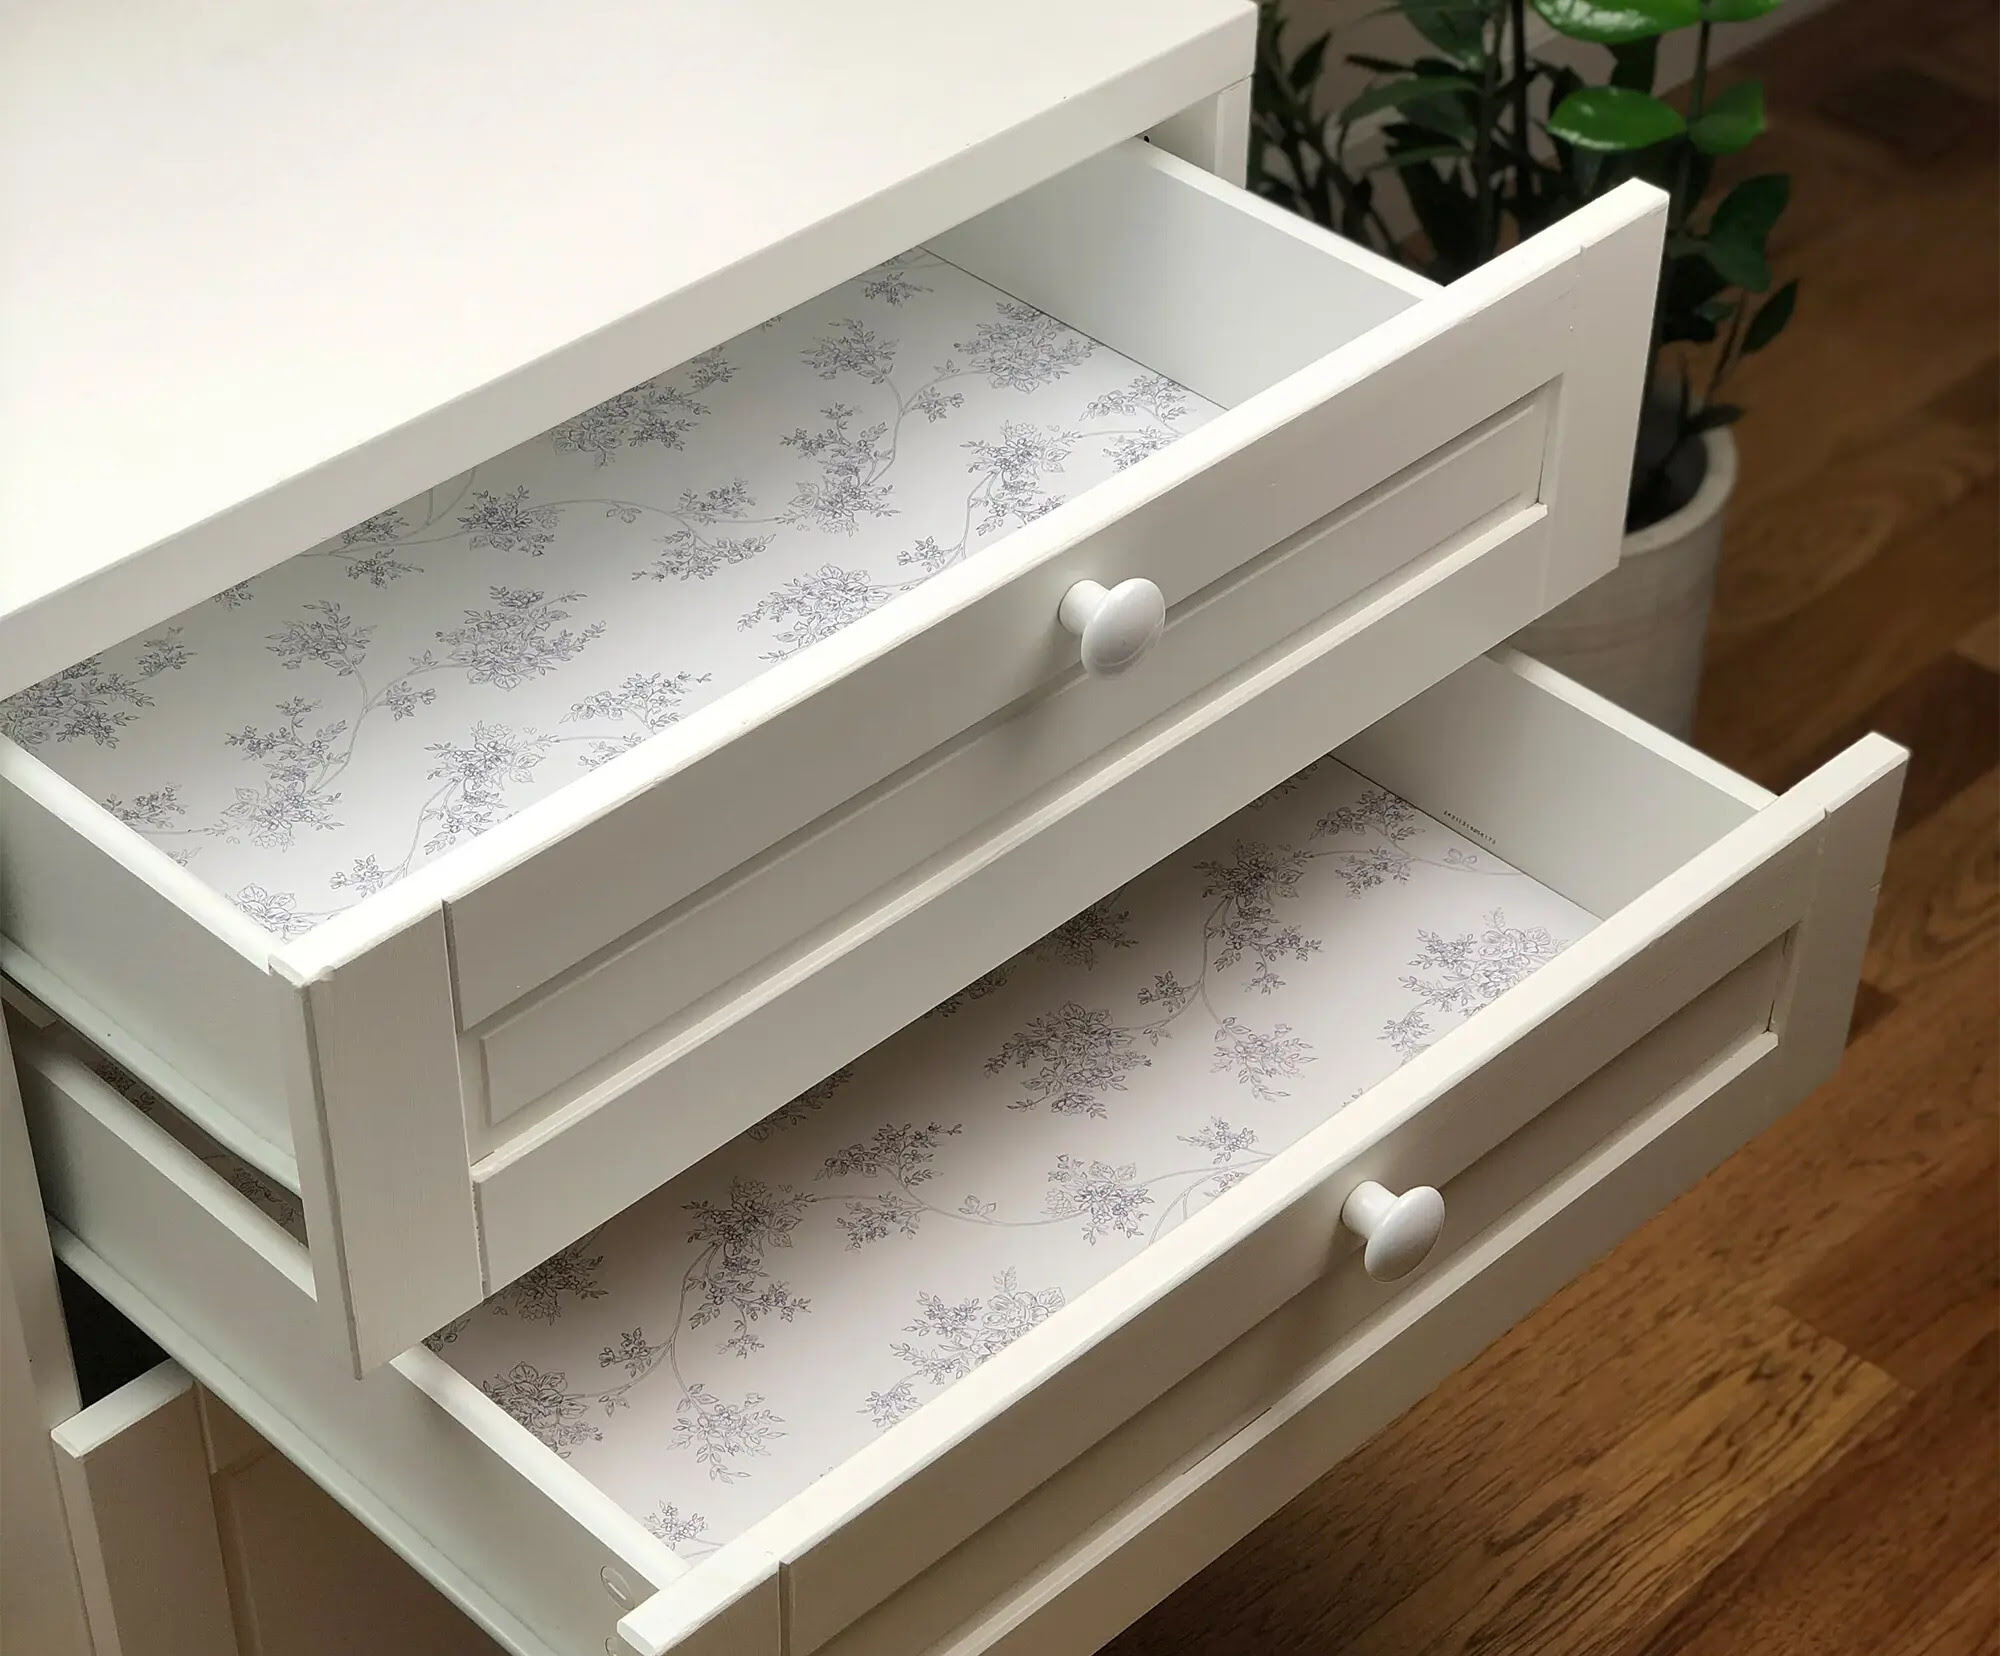 Best Kitchen Drawer Liners (Review) in 2023 - Old House Journal